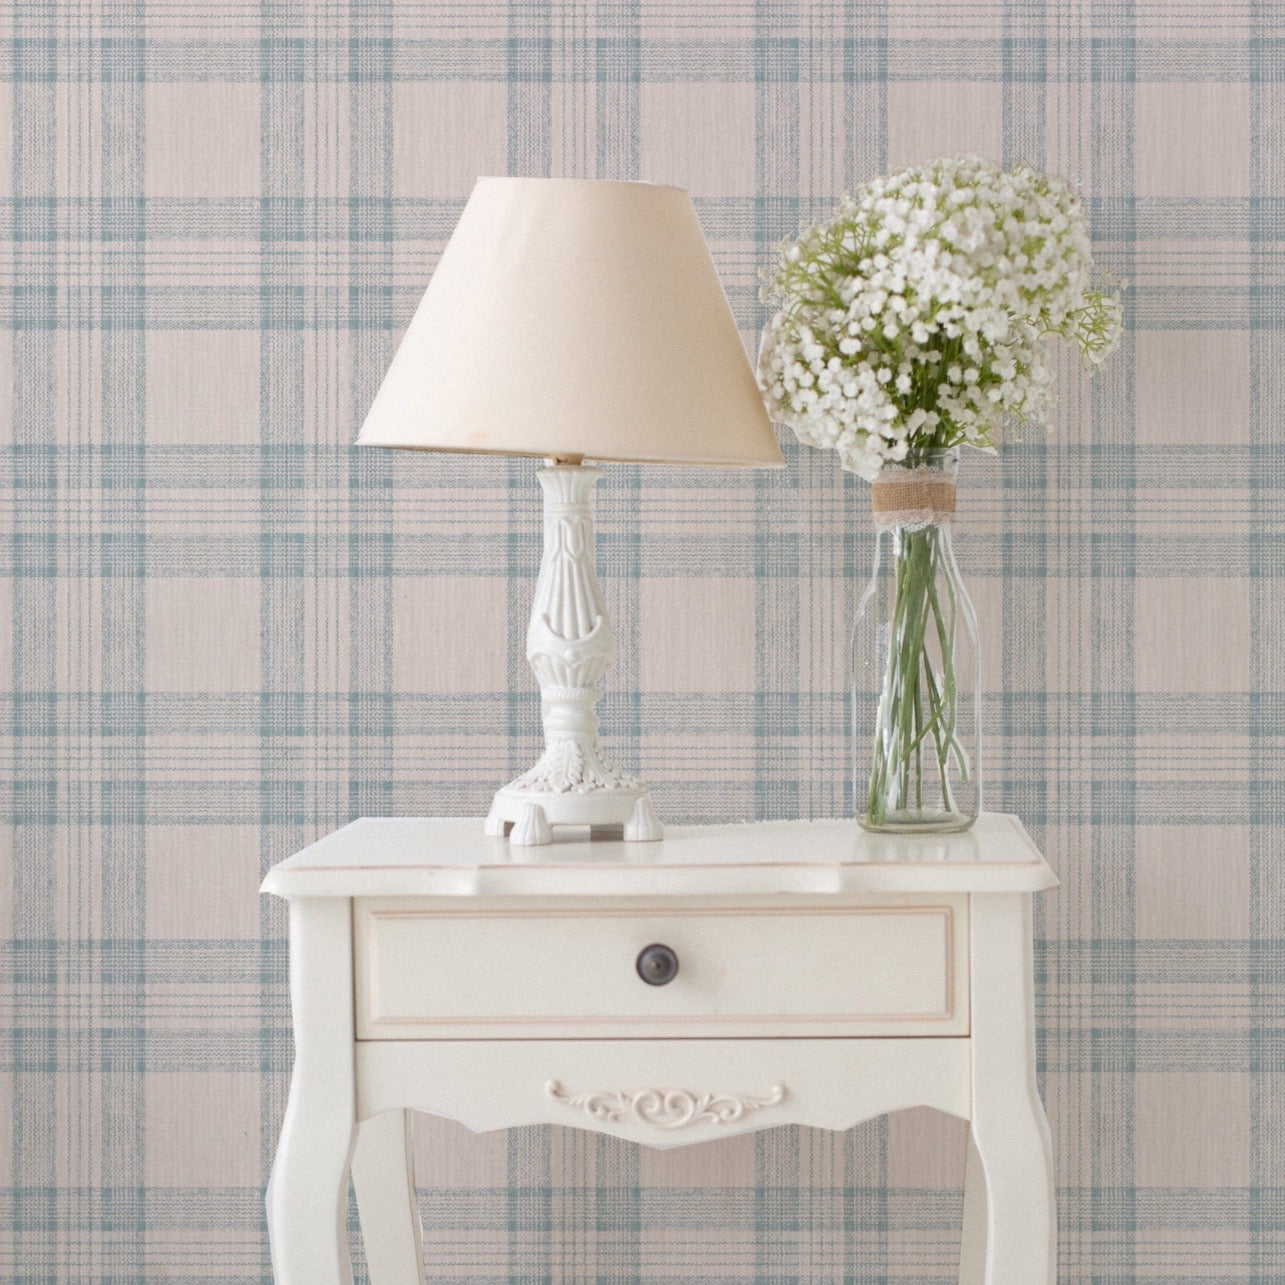 A quaint corner featuring the 'Plaid Wallpaper - Tartan Sand and Sky' as a backdrop, with a classic white side table bearing a traditional lamp with a beige shade and a clear glass vase filled with delicate white baby's breath flowers. The wallpaper's soft plaid pattern complements the vintage charm of the decor, creating a serene and welcoming space.